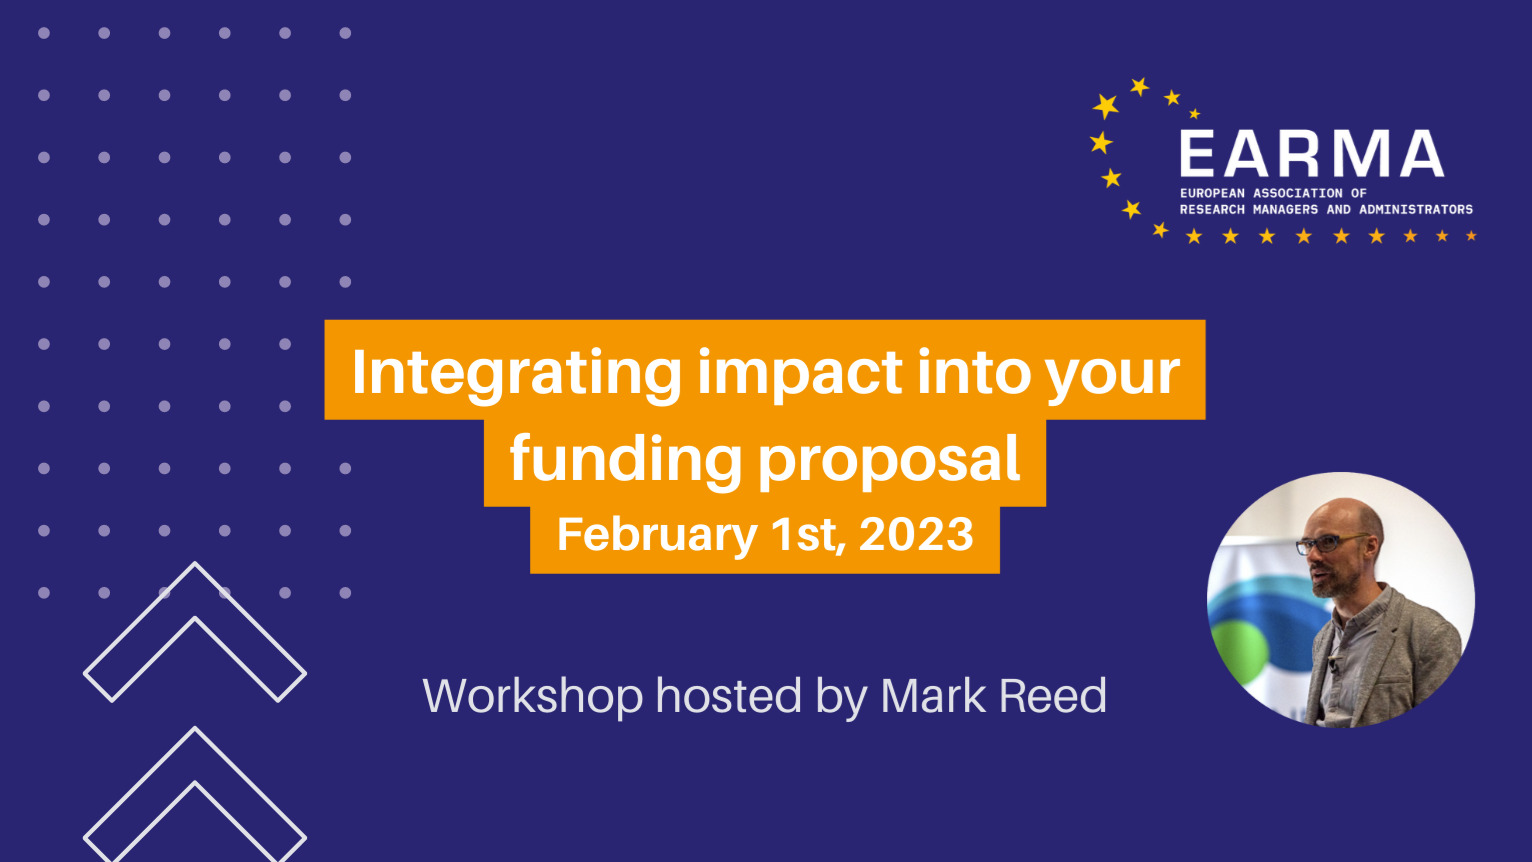 Integrating impact into your funding proposal